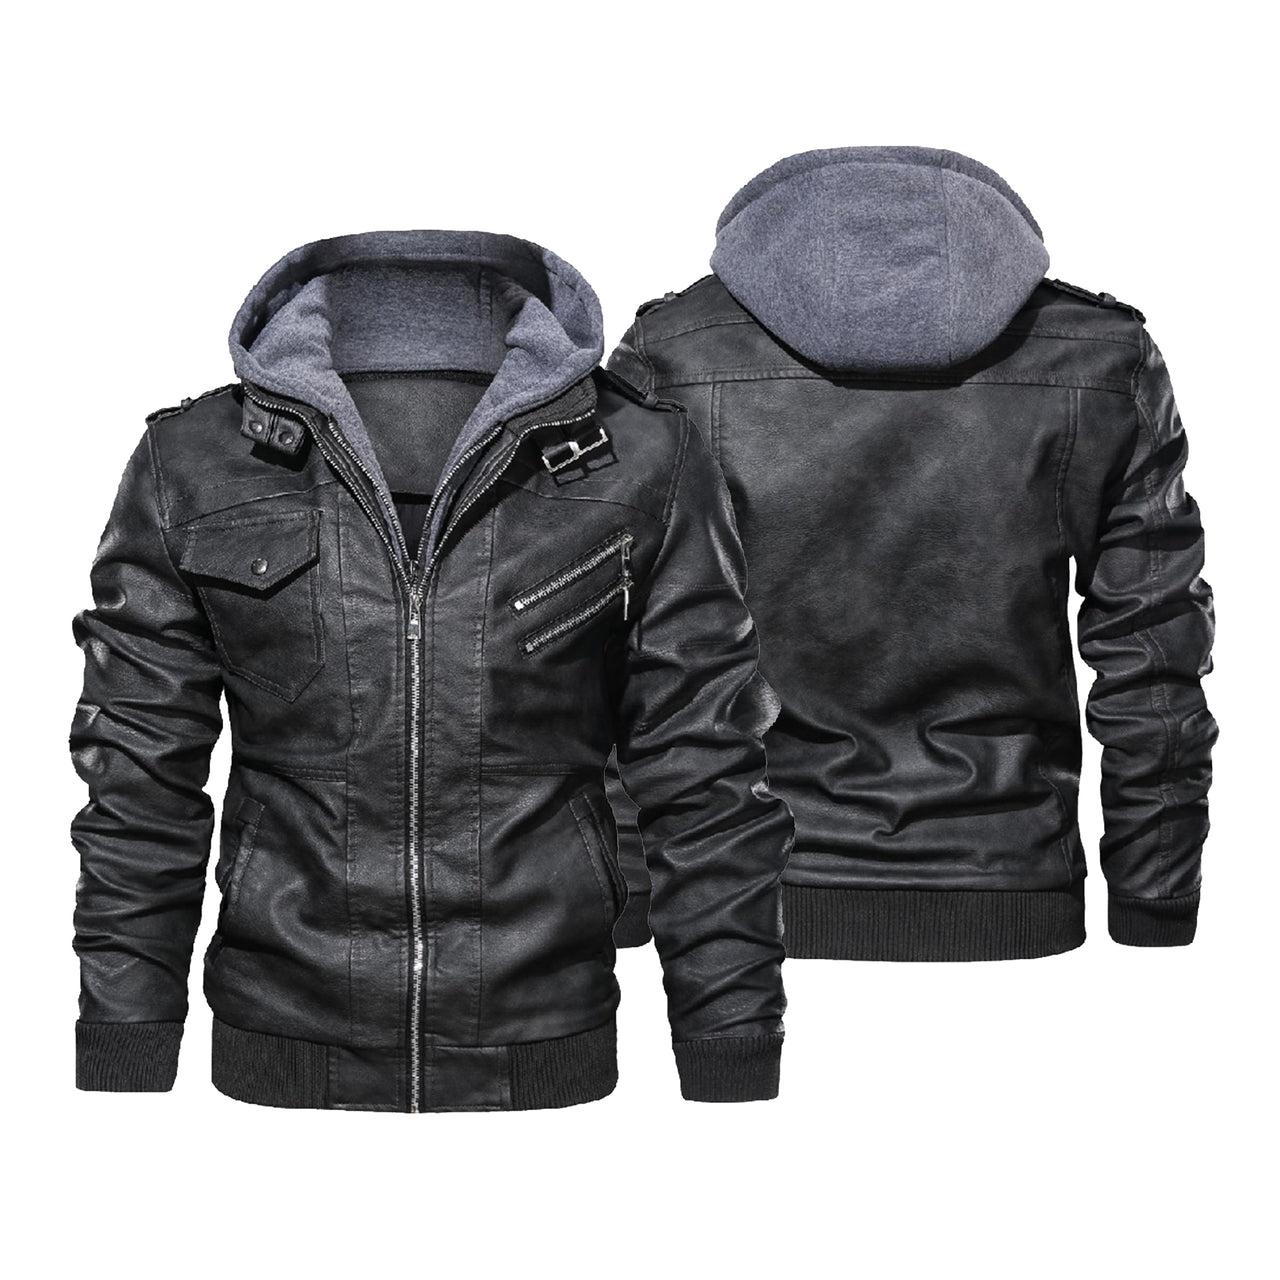 NO Designed Hooded Leather Jackets